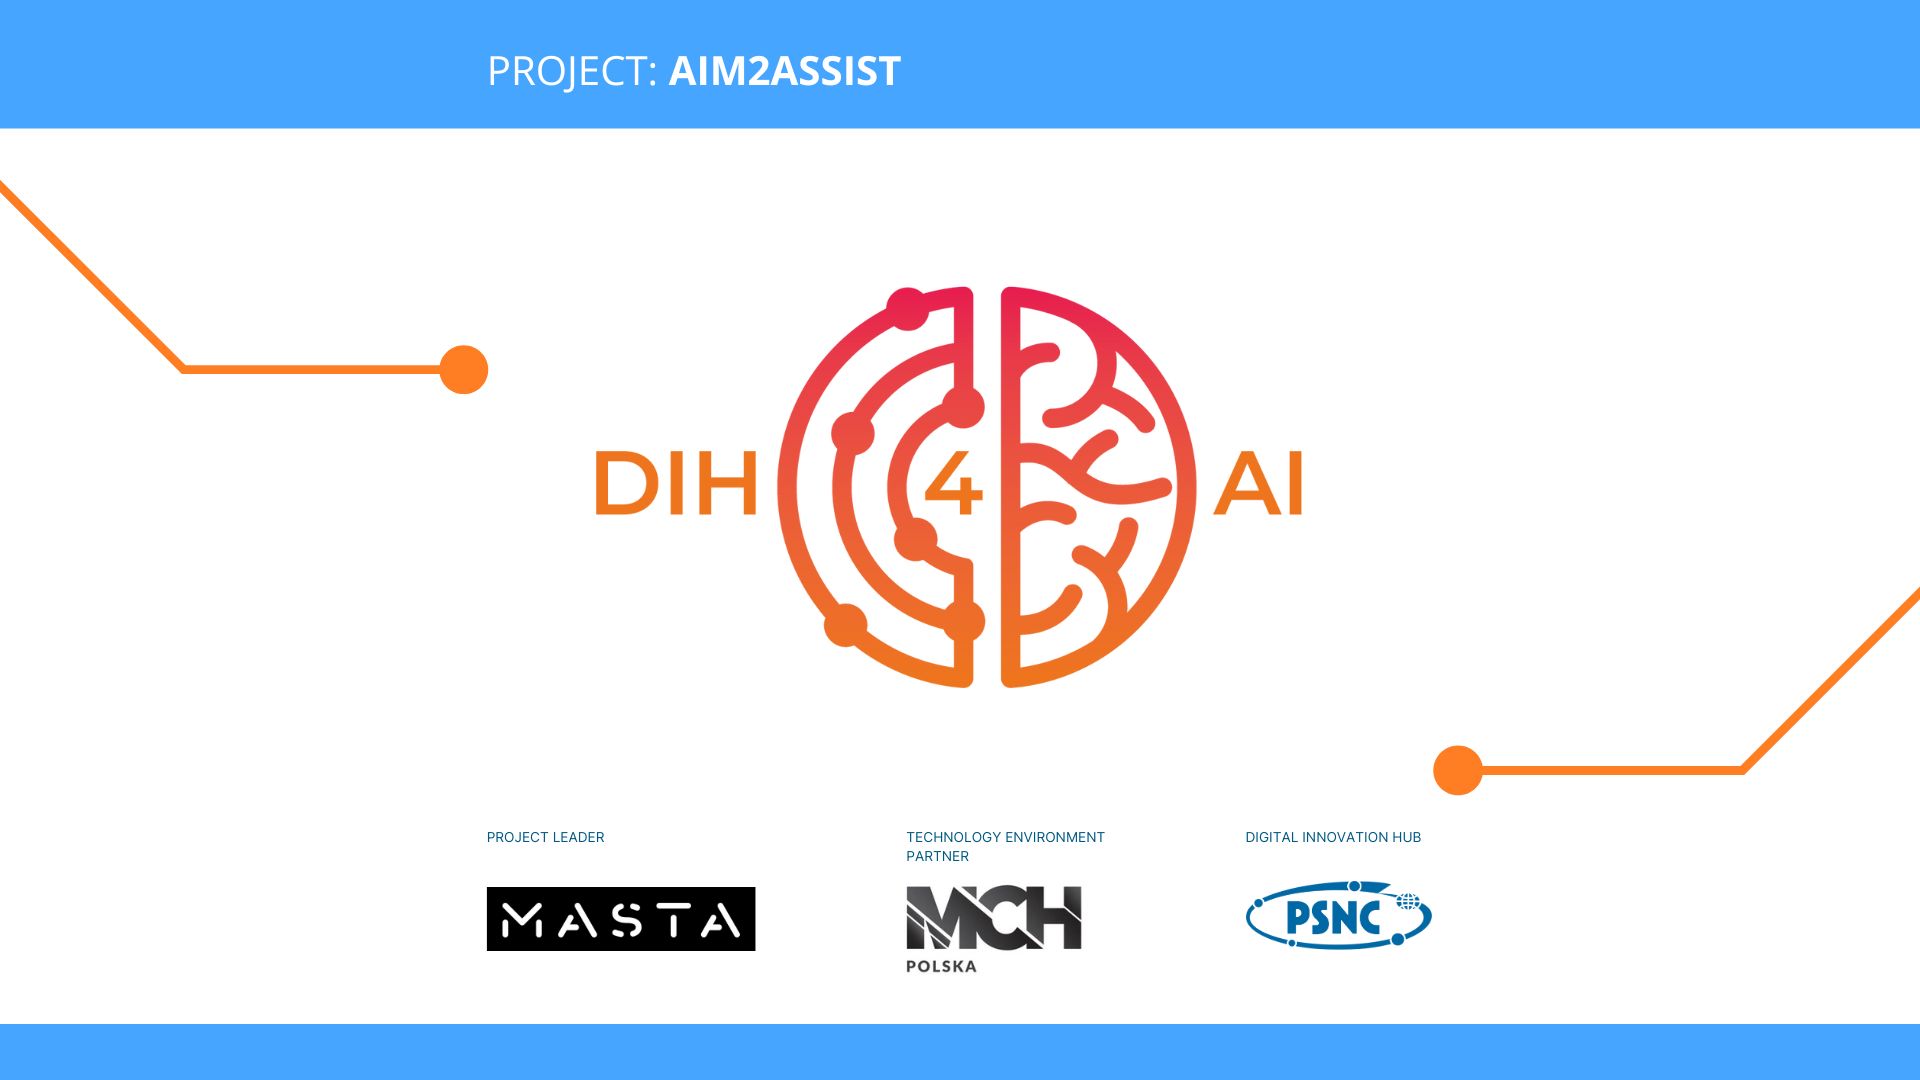 DIH4AI: consortium within the AIM2ASSIST project